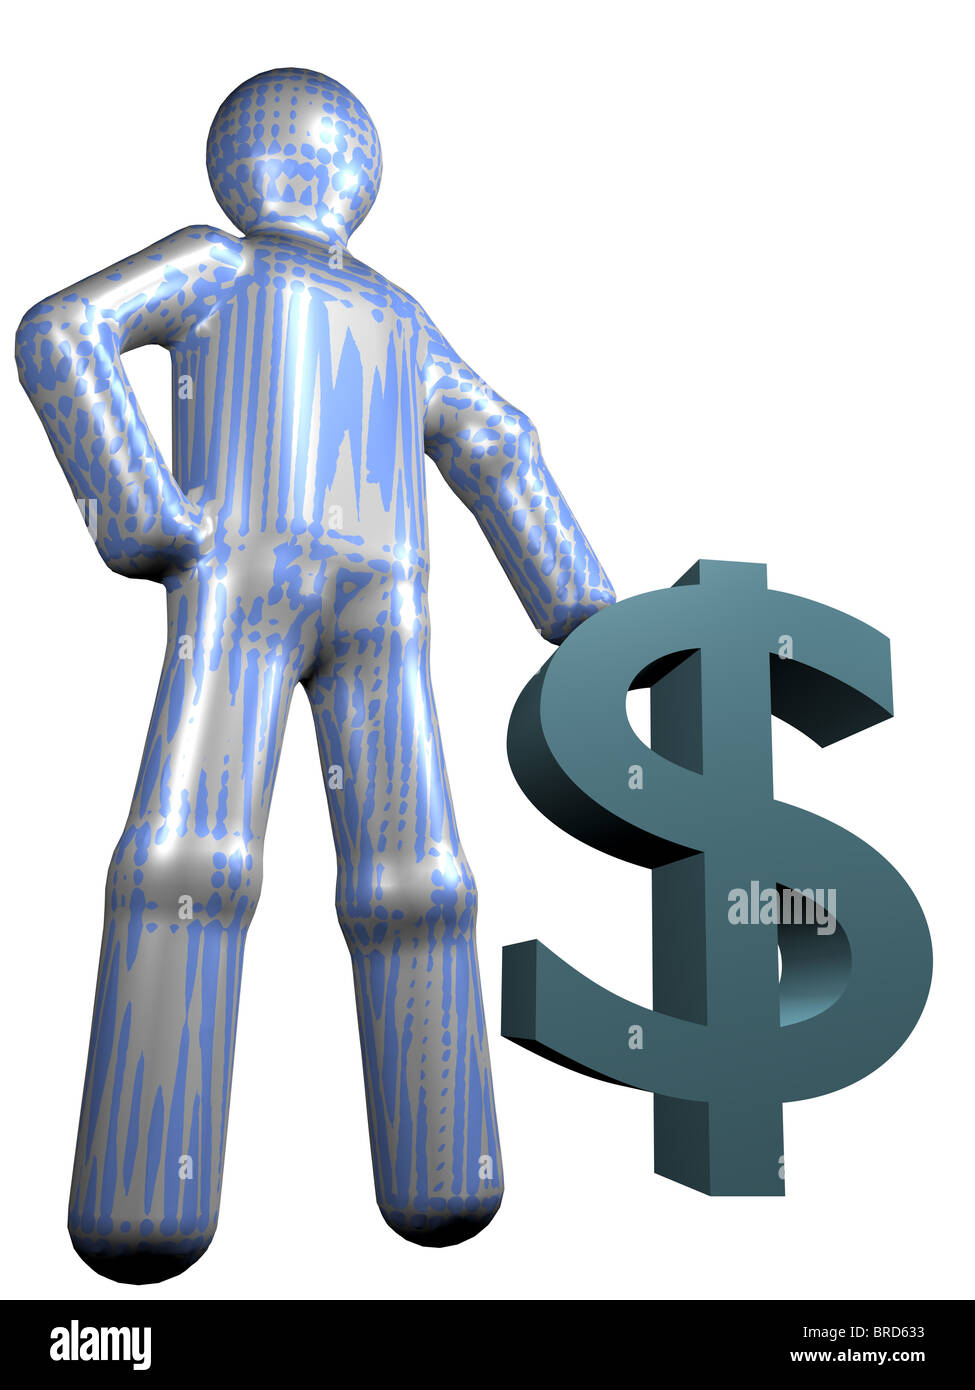 A stylized person standing next to dollar symbol Stock Photo